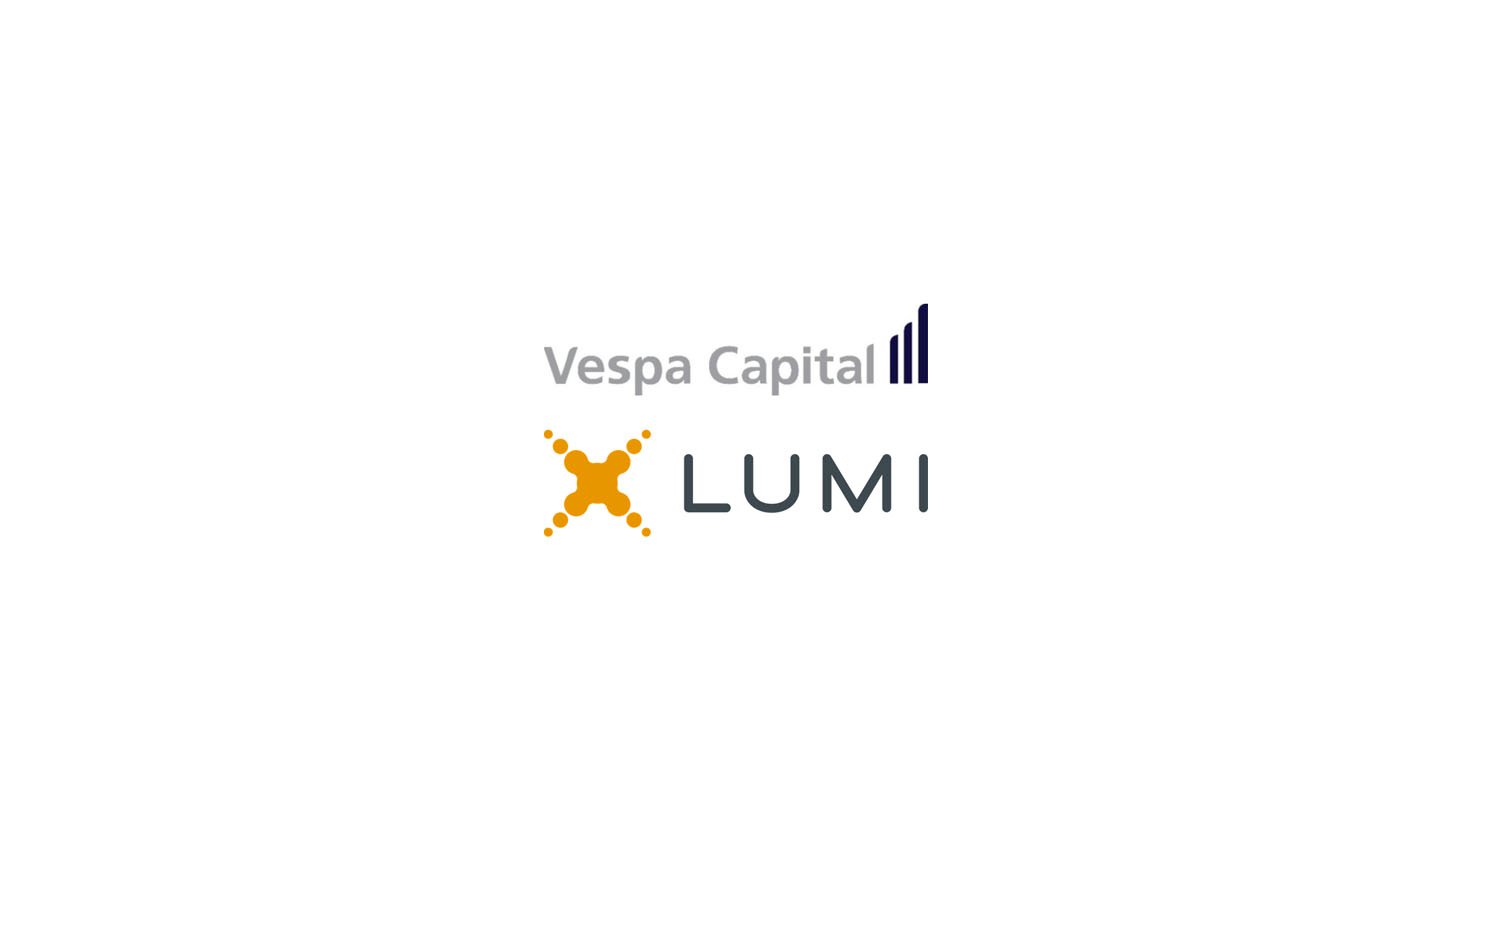 Vespa Capital invests in Lumi, an industry leader in AGM and event software